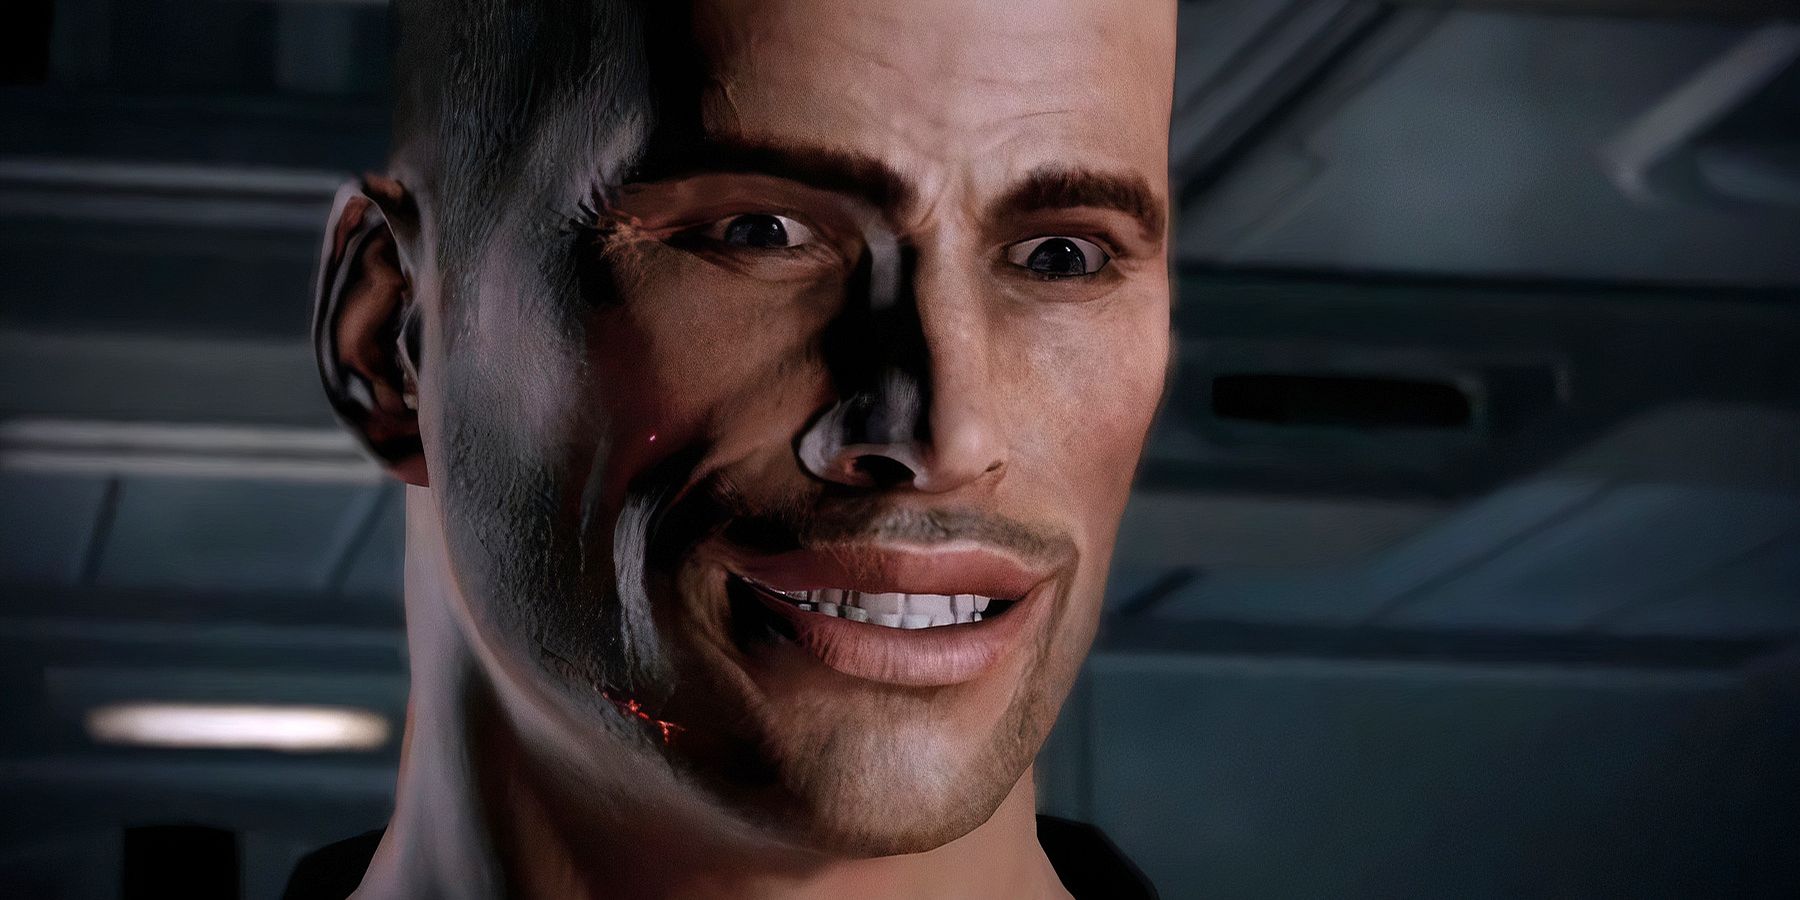 Mass Effect Shepard with a goofy smile